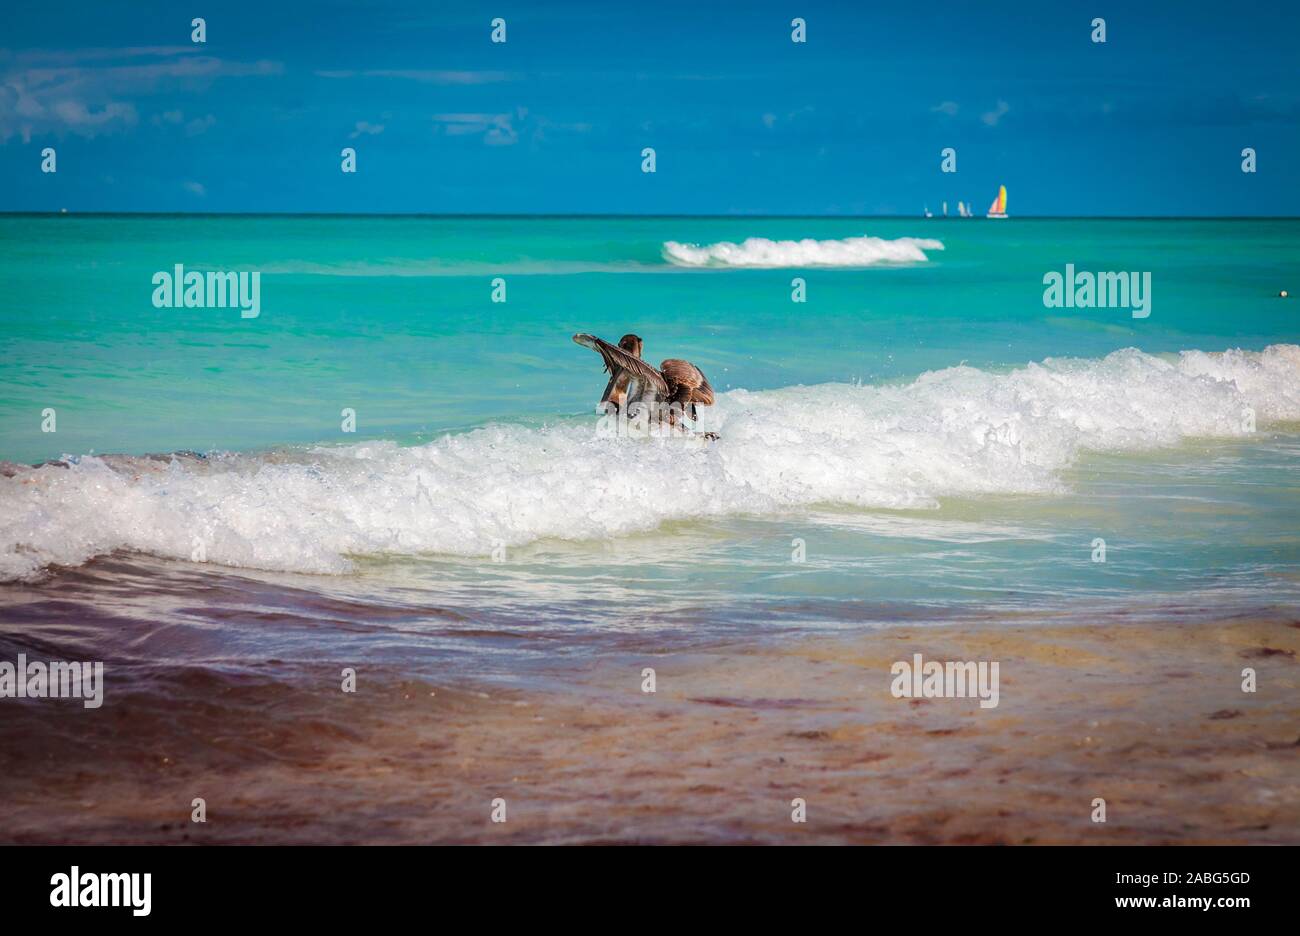 Beautiful turquoise seascape with brown pelican riding the waves in the foreground at Varadero, Cuba Stock Photo